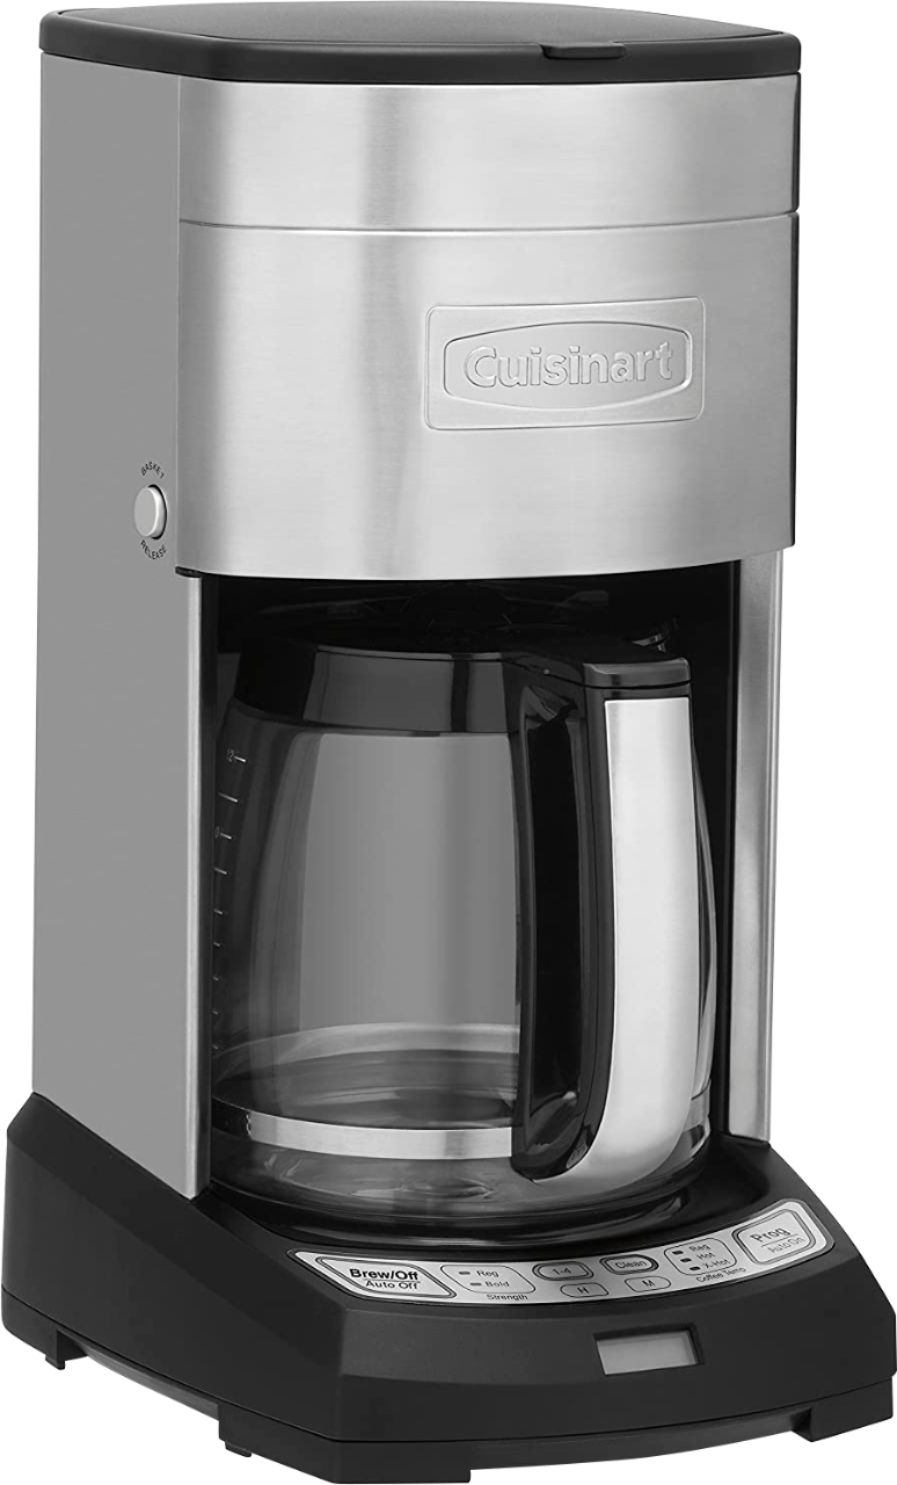 Angle View: Cuisinart - T Series 14-Cup Coffee Maker with Water Filtration - Black